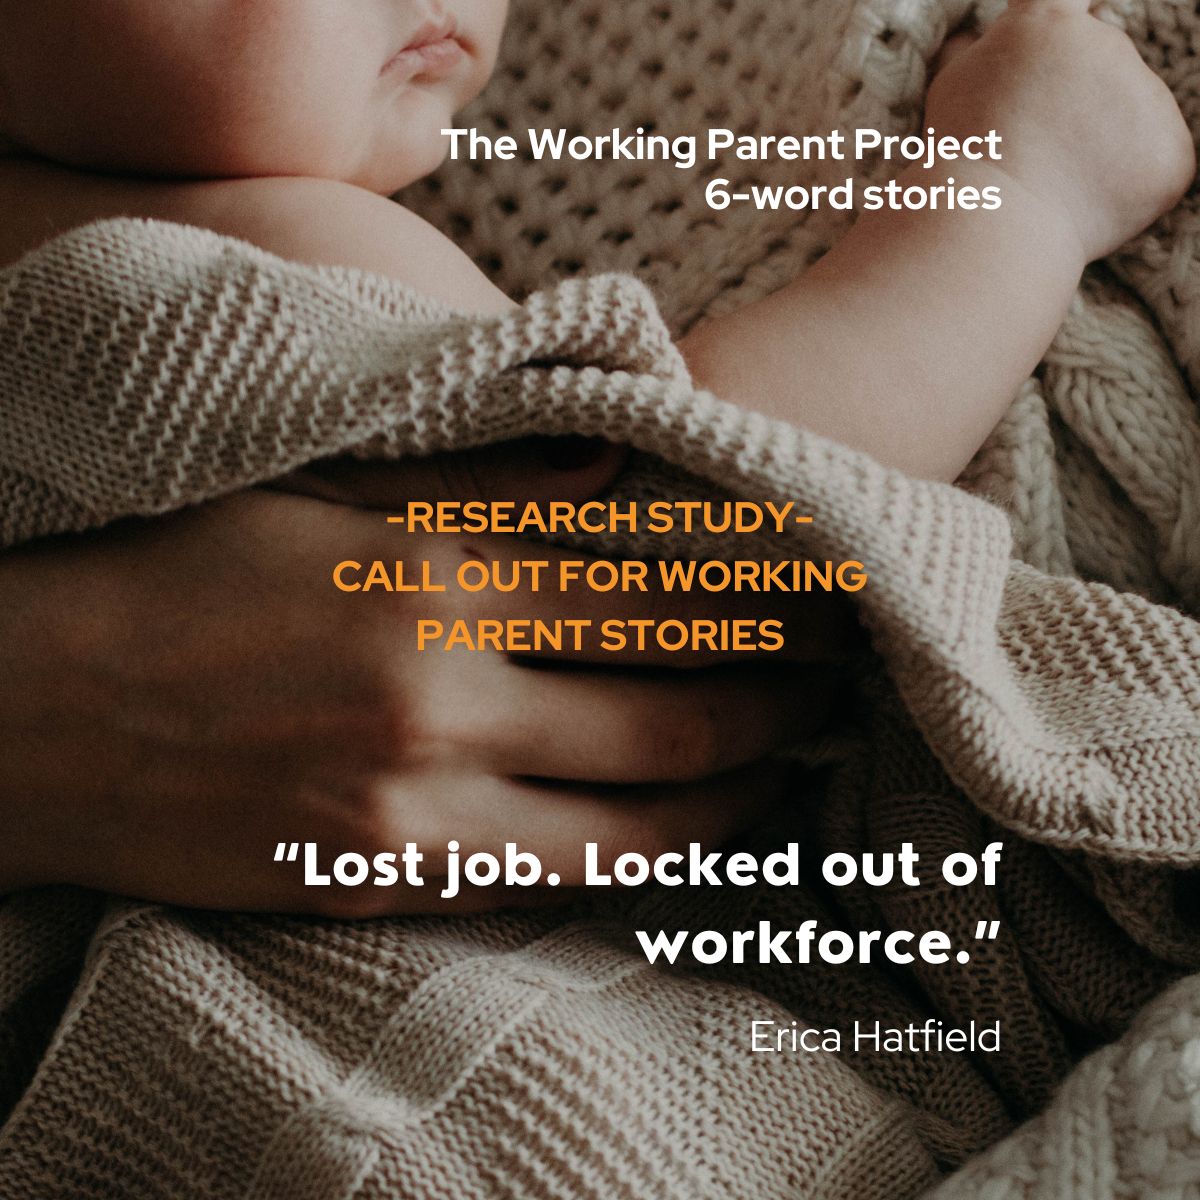 Research study – request for working parent stories